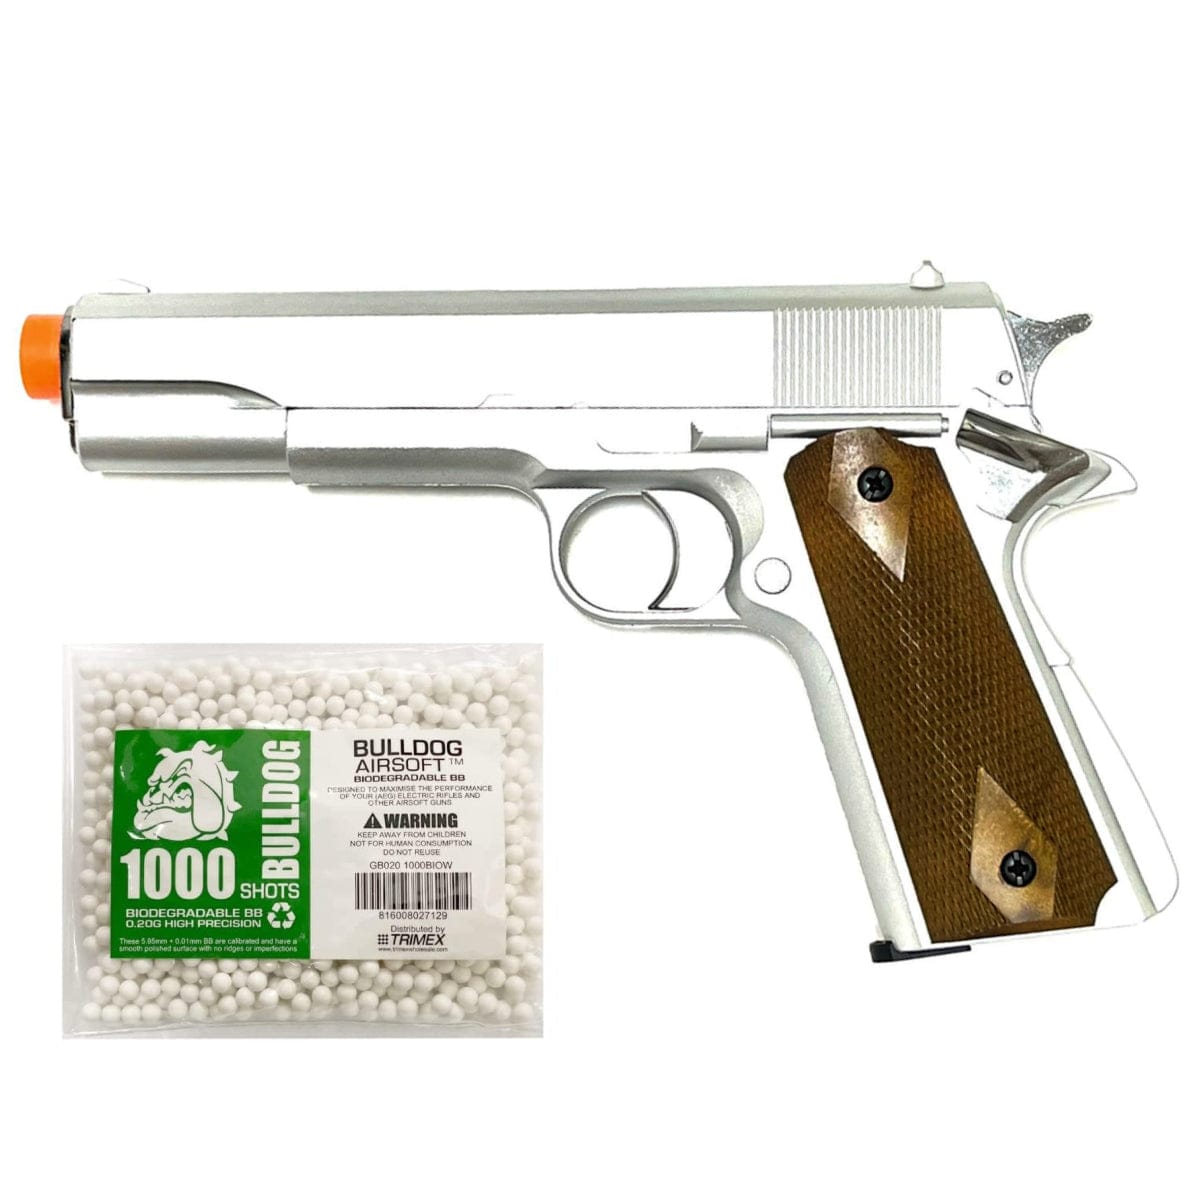 Airsportinggoods HFC HG121 AIRSOFT GAS PISTOL SILVER